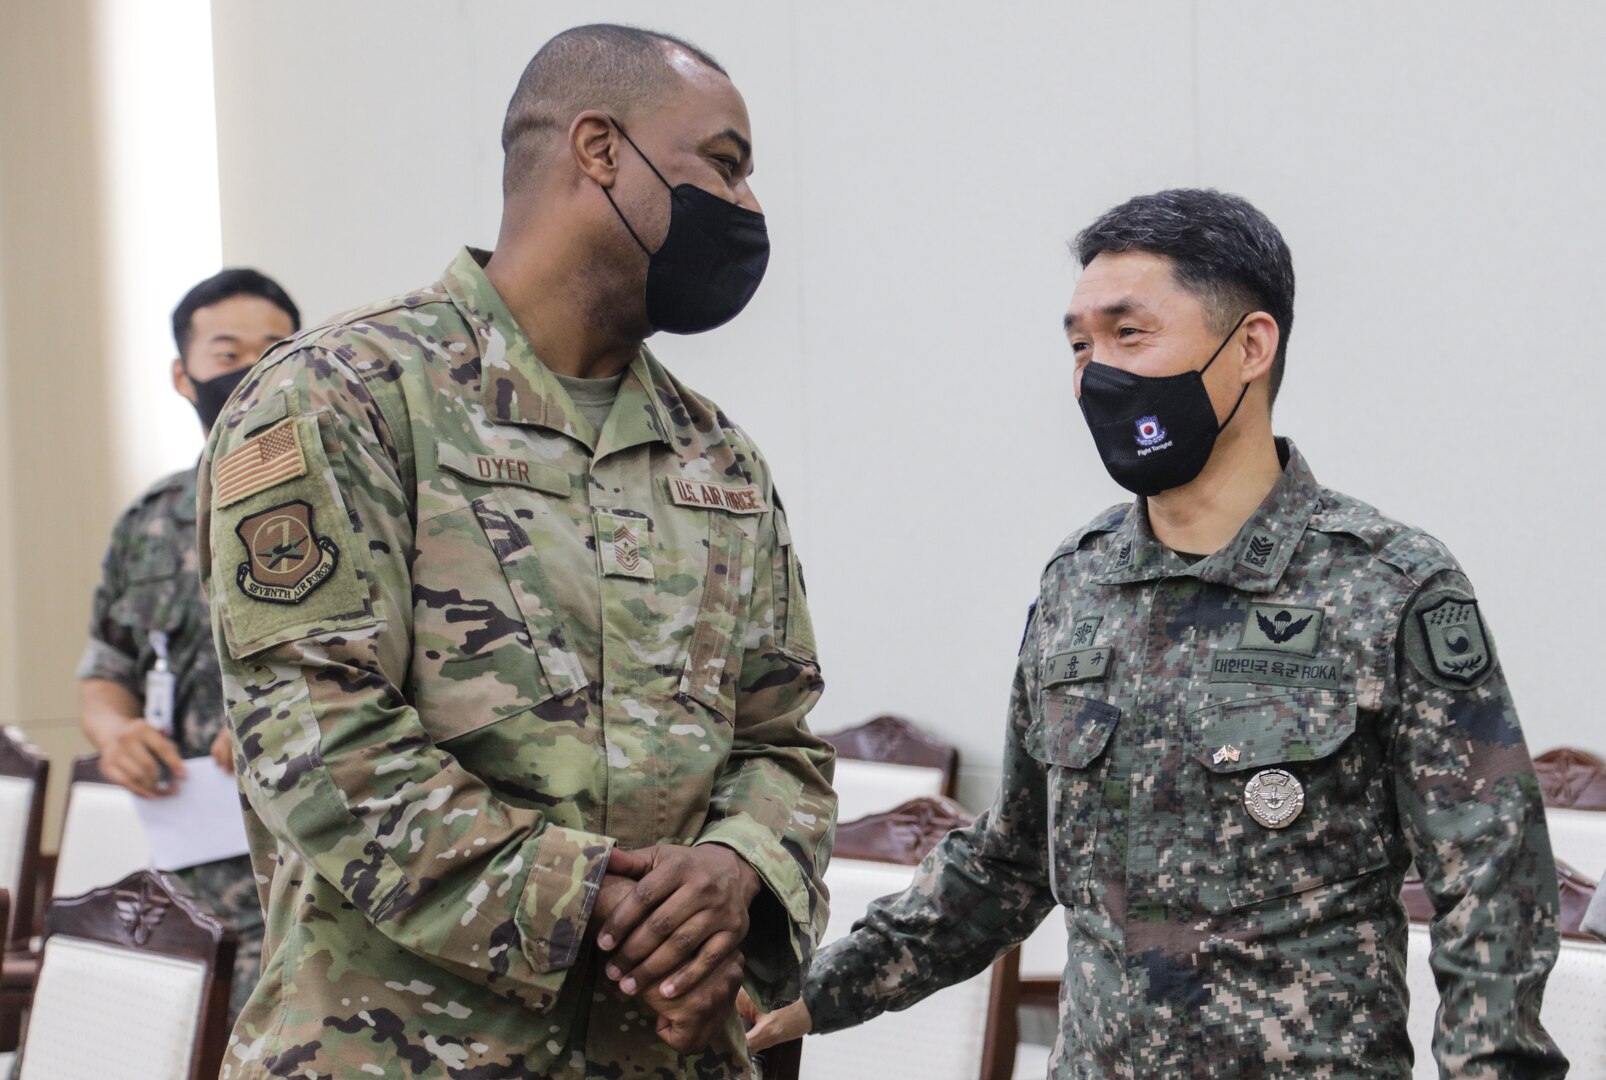 Command Chief Master Sgt. Alvin R. Dyer, senior enlisted advisor for 7th Air Force, and Command Sgt. Major Yong-kyu Lee, senior enlisted advisor for the Combined Forces Command Republic of Korea forces, share a moment of camaraderie at the ROK Chiefs of Staff Headquarters, June 21, 2022.